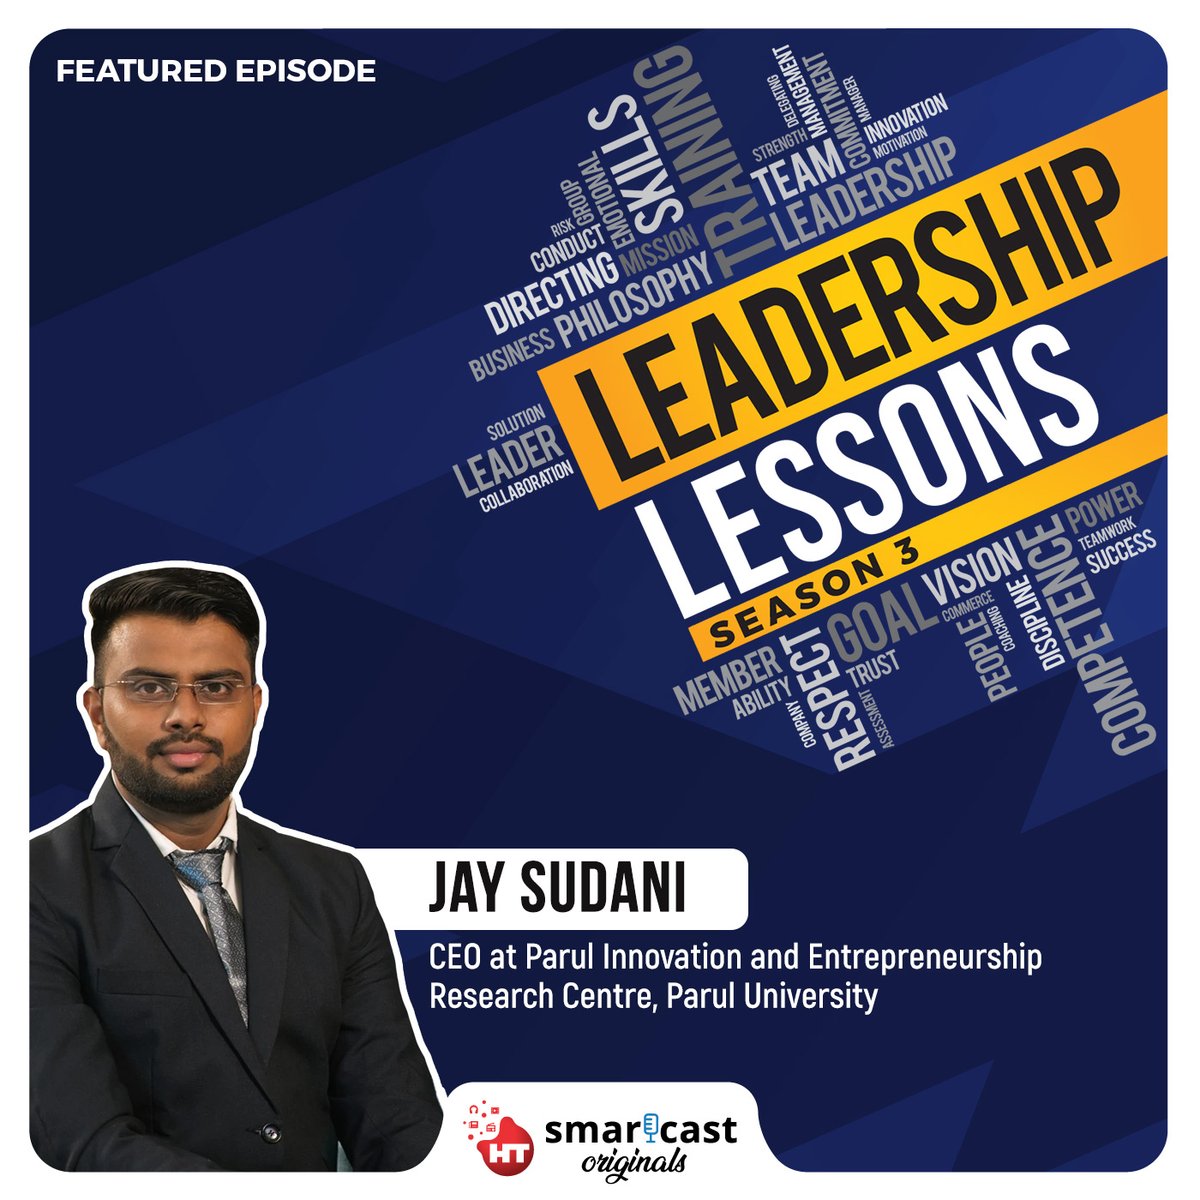 Discover how @JaySudani5  CEO at Parul Innovation & Entrepreneurship Research Centre, @ParulUniversity, is empowering 45,000+ students with a vibrant Startup Incubation Centre, fueling innovation and #entrepreneurship - shorturl.at/LMY05 
#LeadershipLessons @yatinsnaik